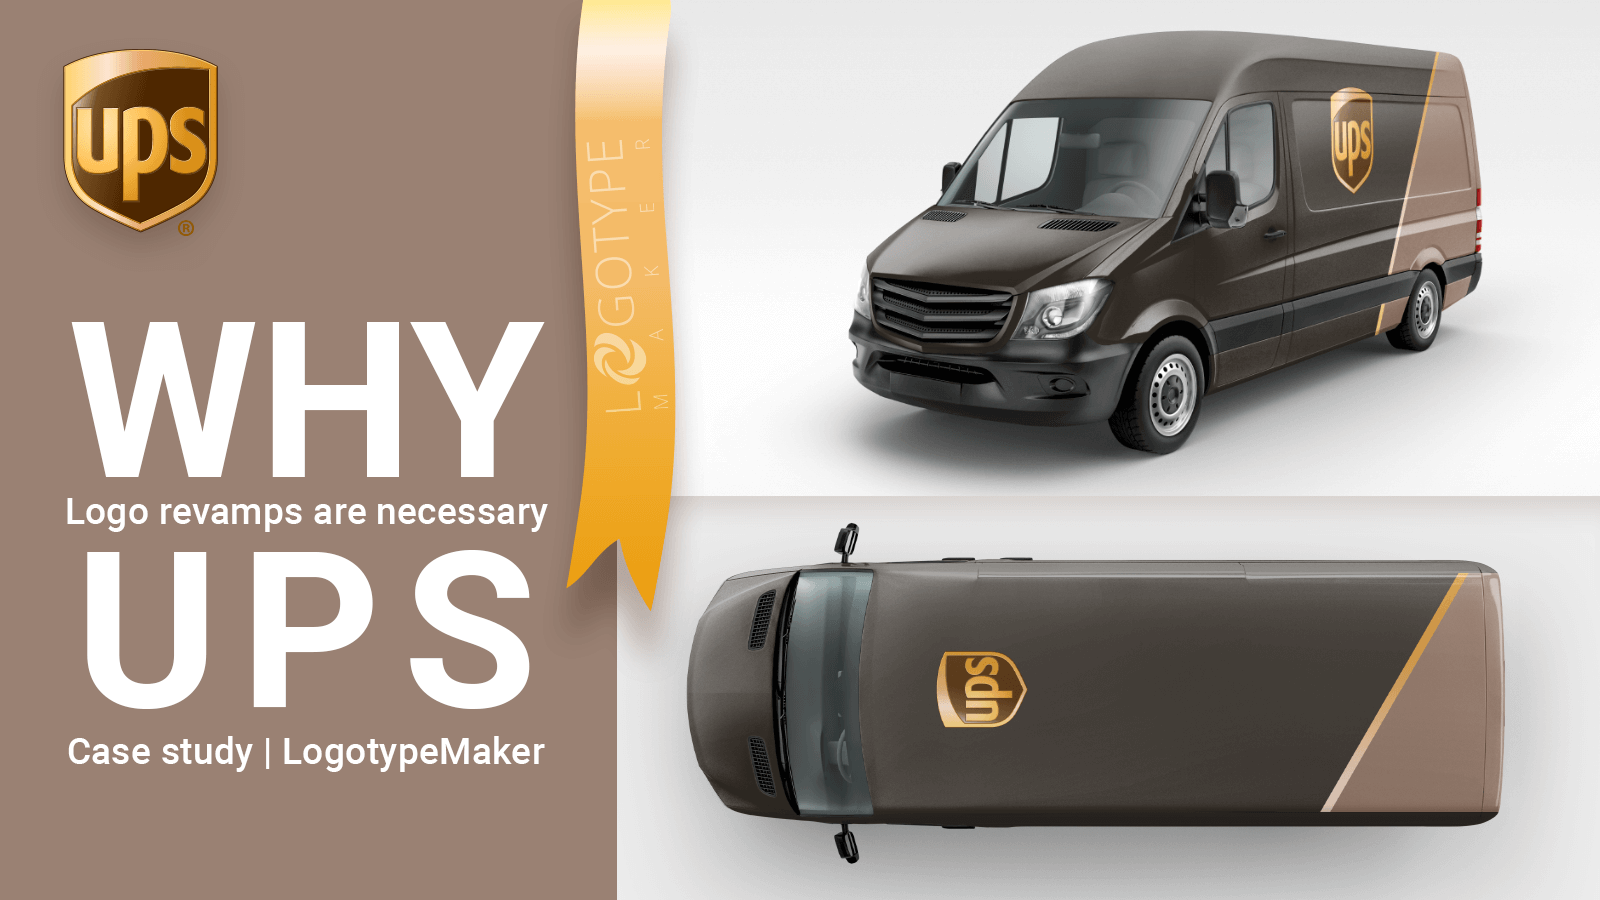 Why logo revamps are necessary? UPS case study | Logotypemaker